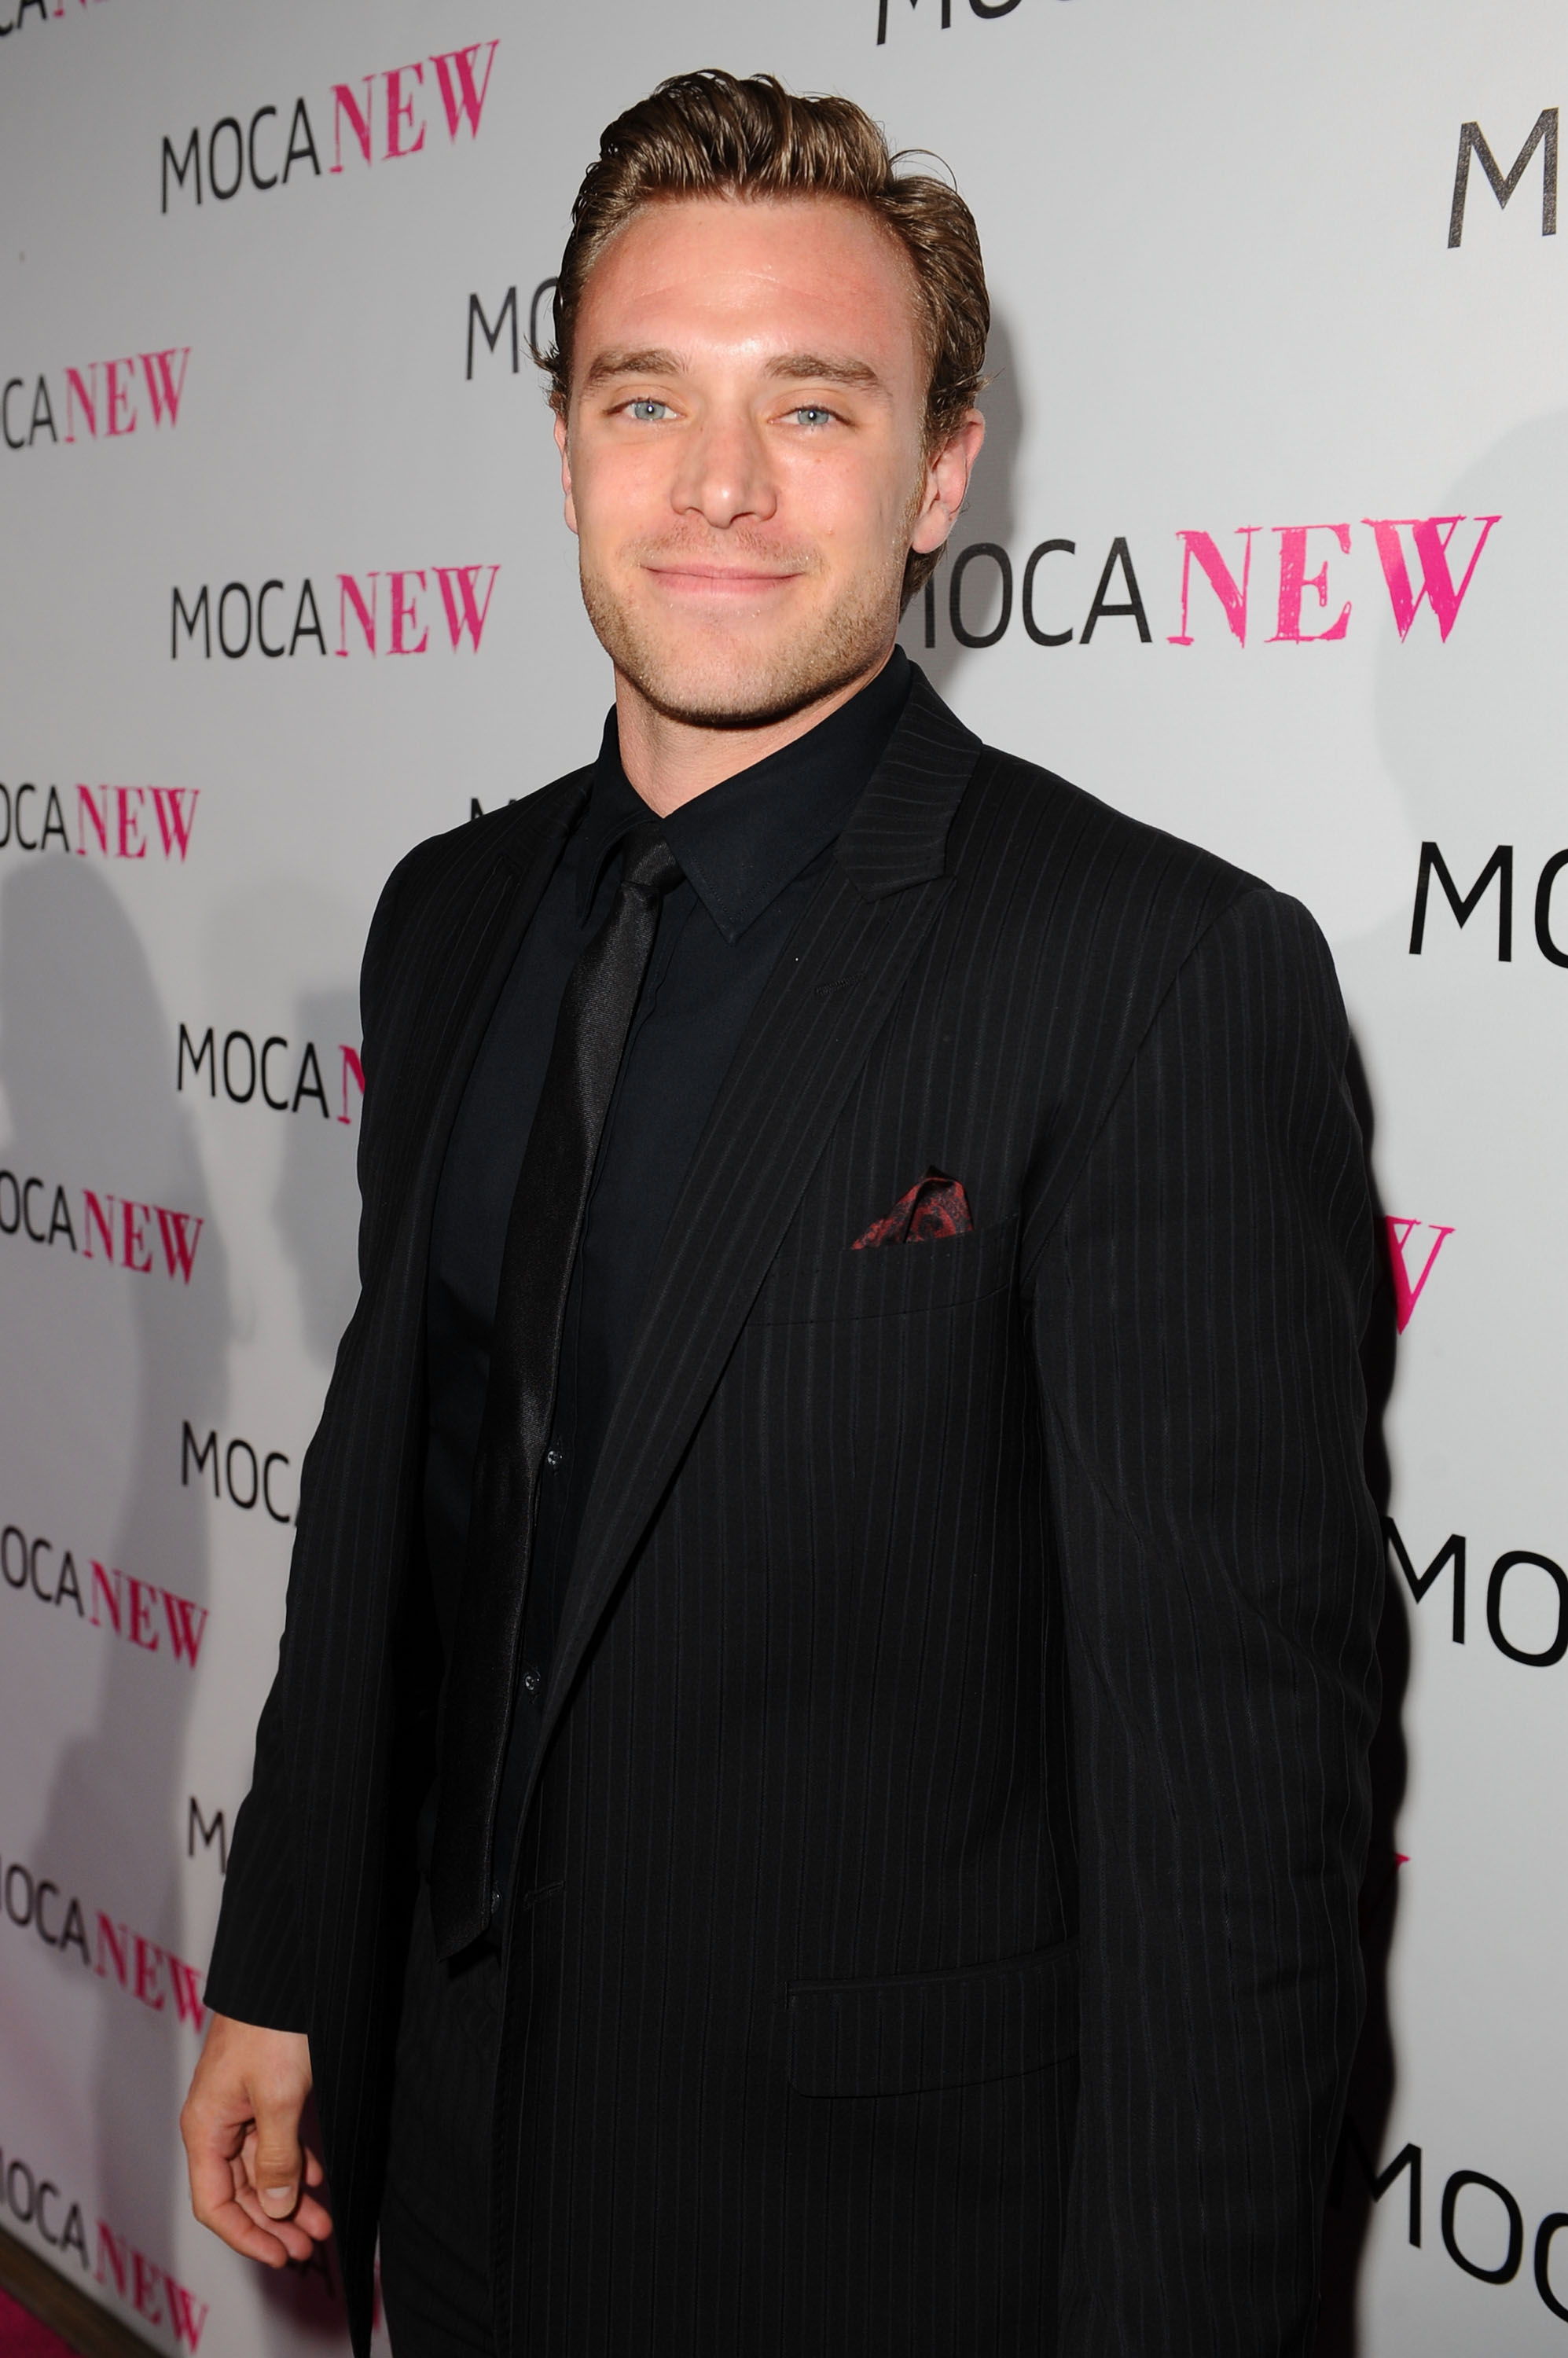 Billy Miller at the MOCA NEW 30th anniversary gala held at MOCA on November 14, 2009, in Los Angeles, California. | Source: Getty Images